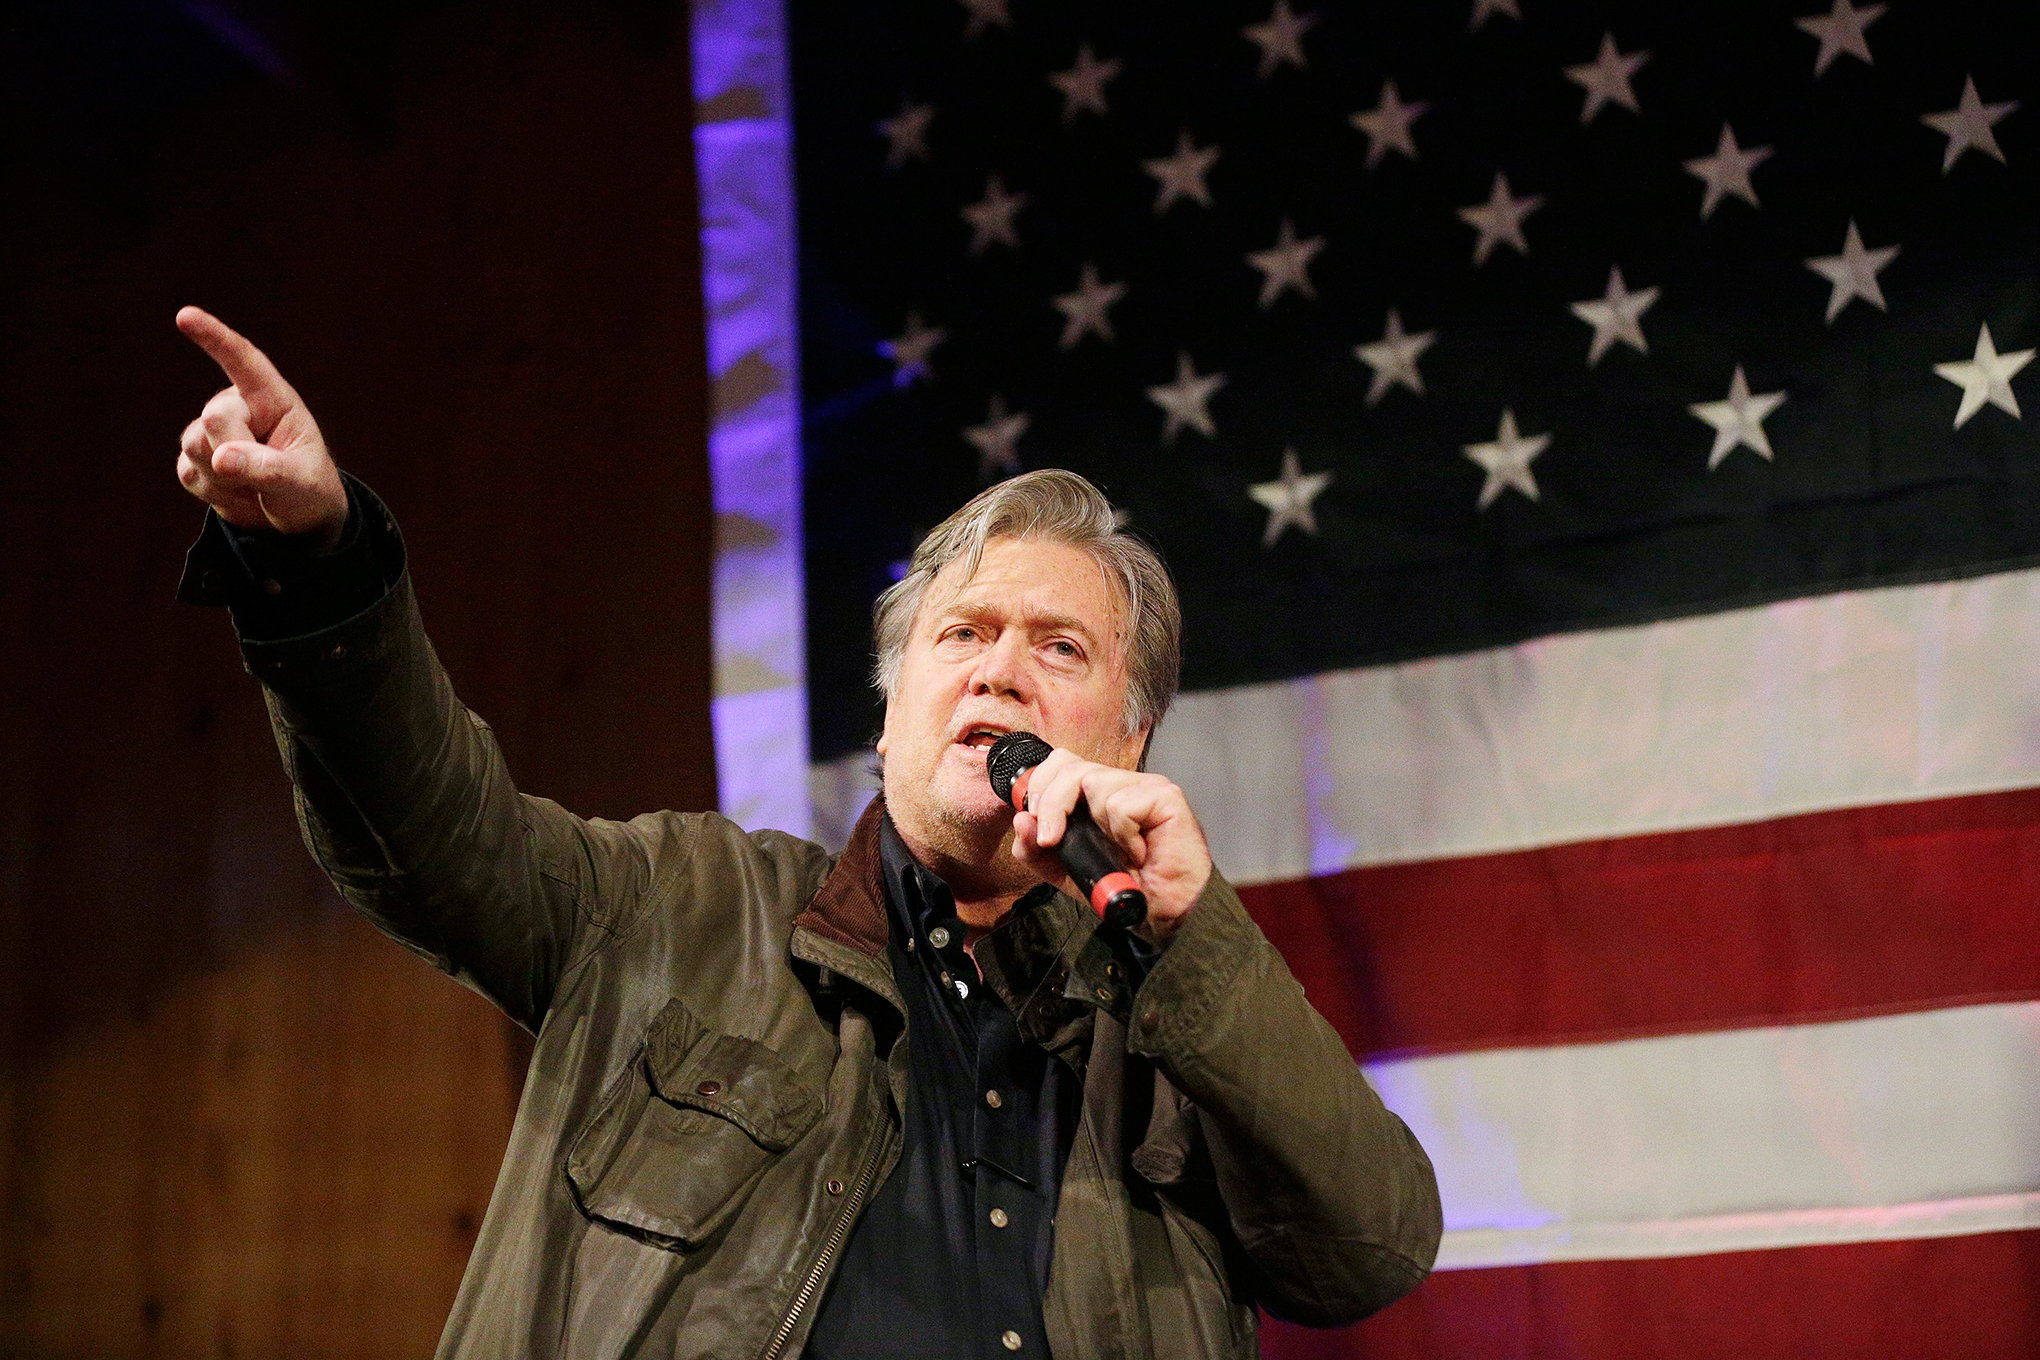 Bannon has declared a “civil war” within the Republican Party